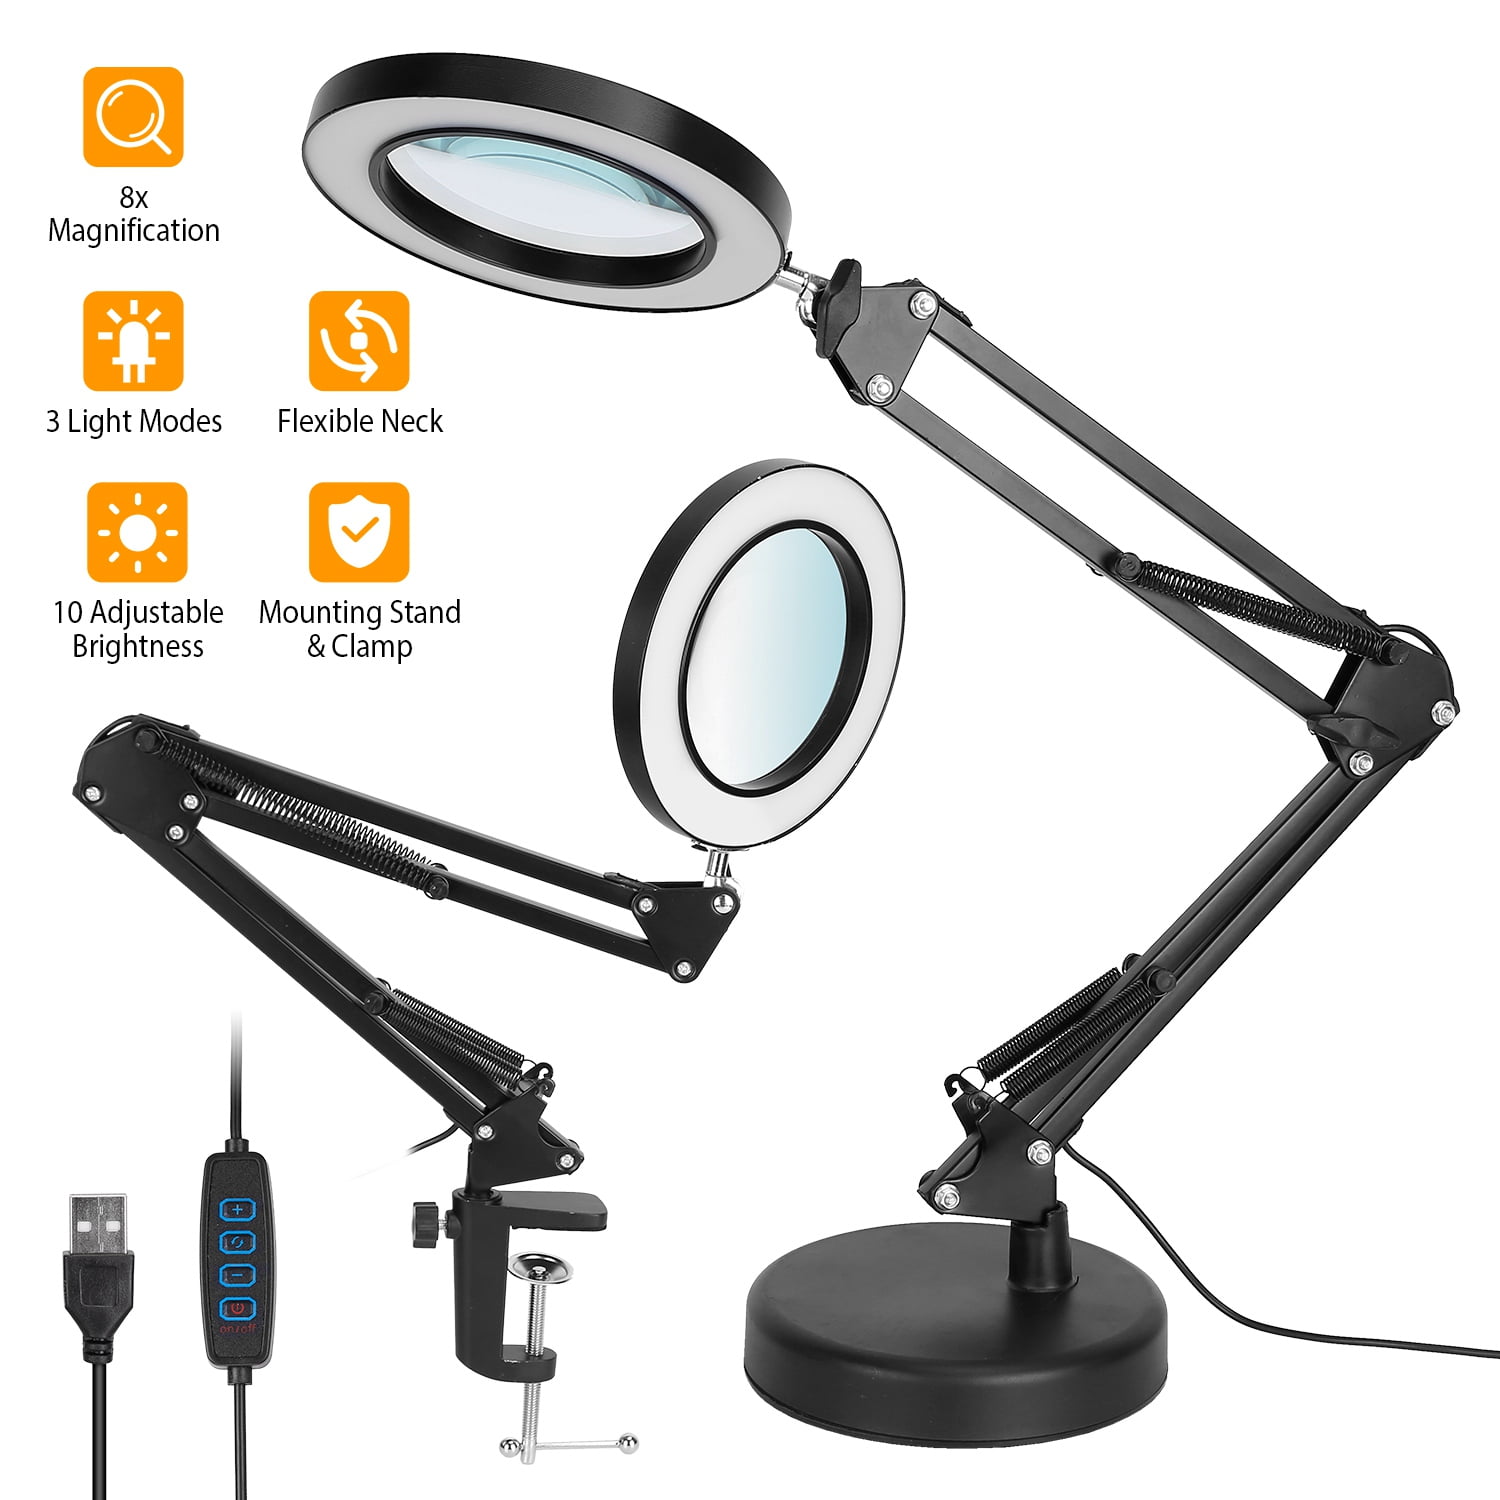 8X Magnifying Lamp, 2-in-1 Glass with Light and Stand 3 Modes 10 adjustable brightness, LED Lighted Magnifier with Light for Reading Crafts Repair Close Works - Walmart.com